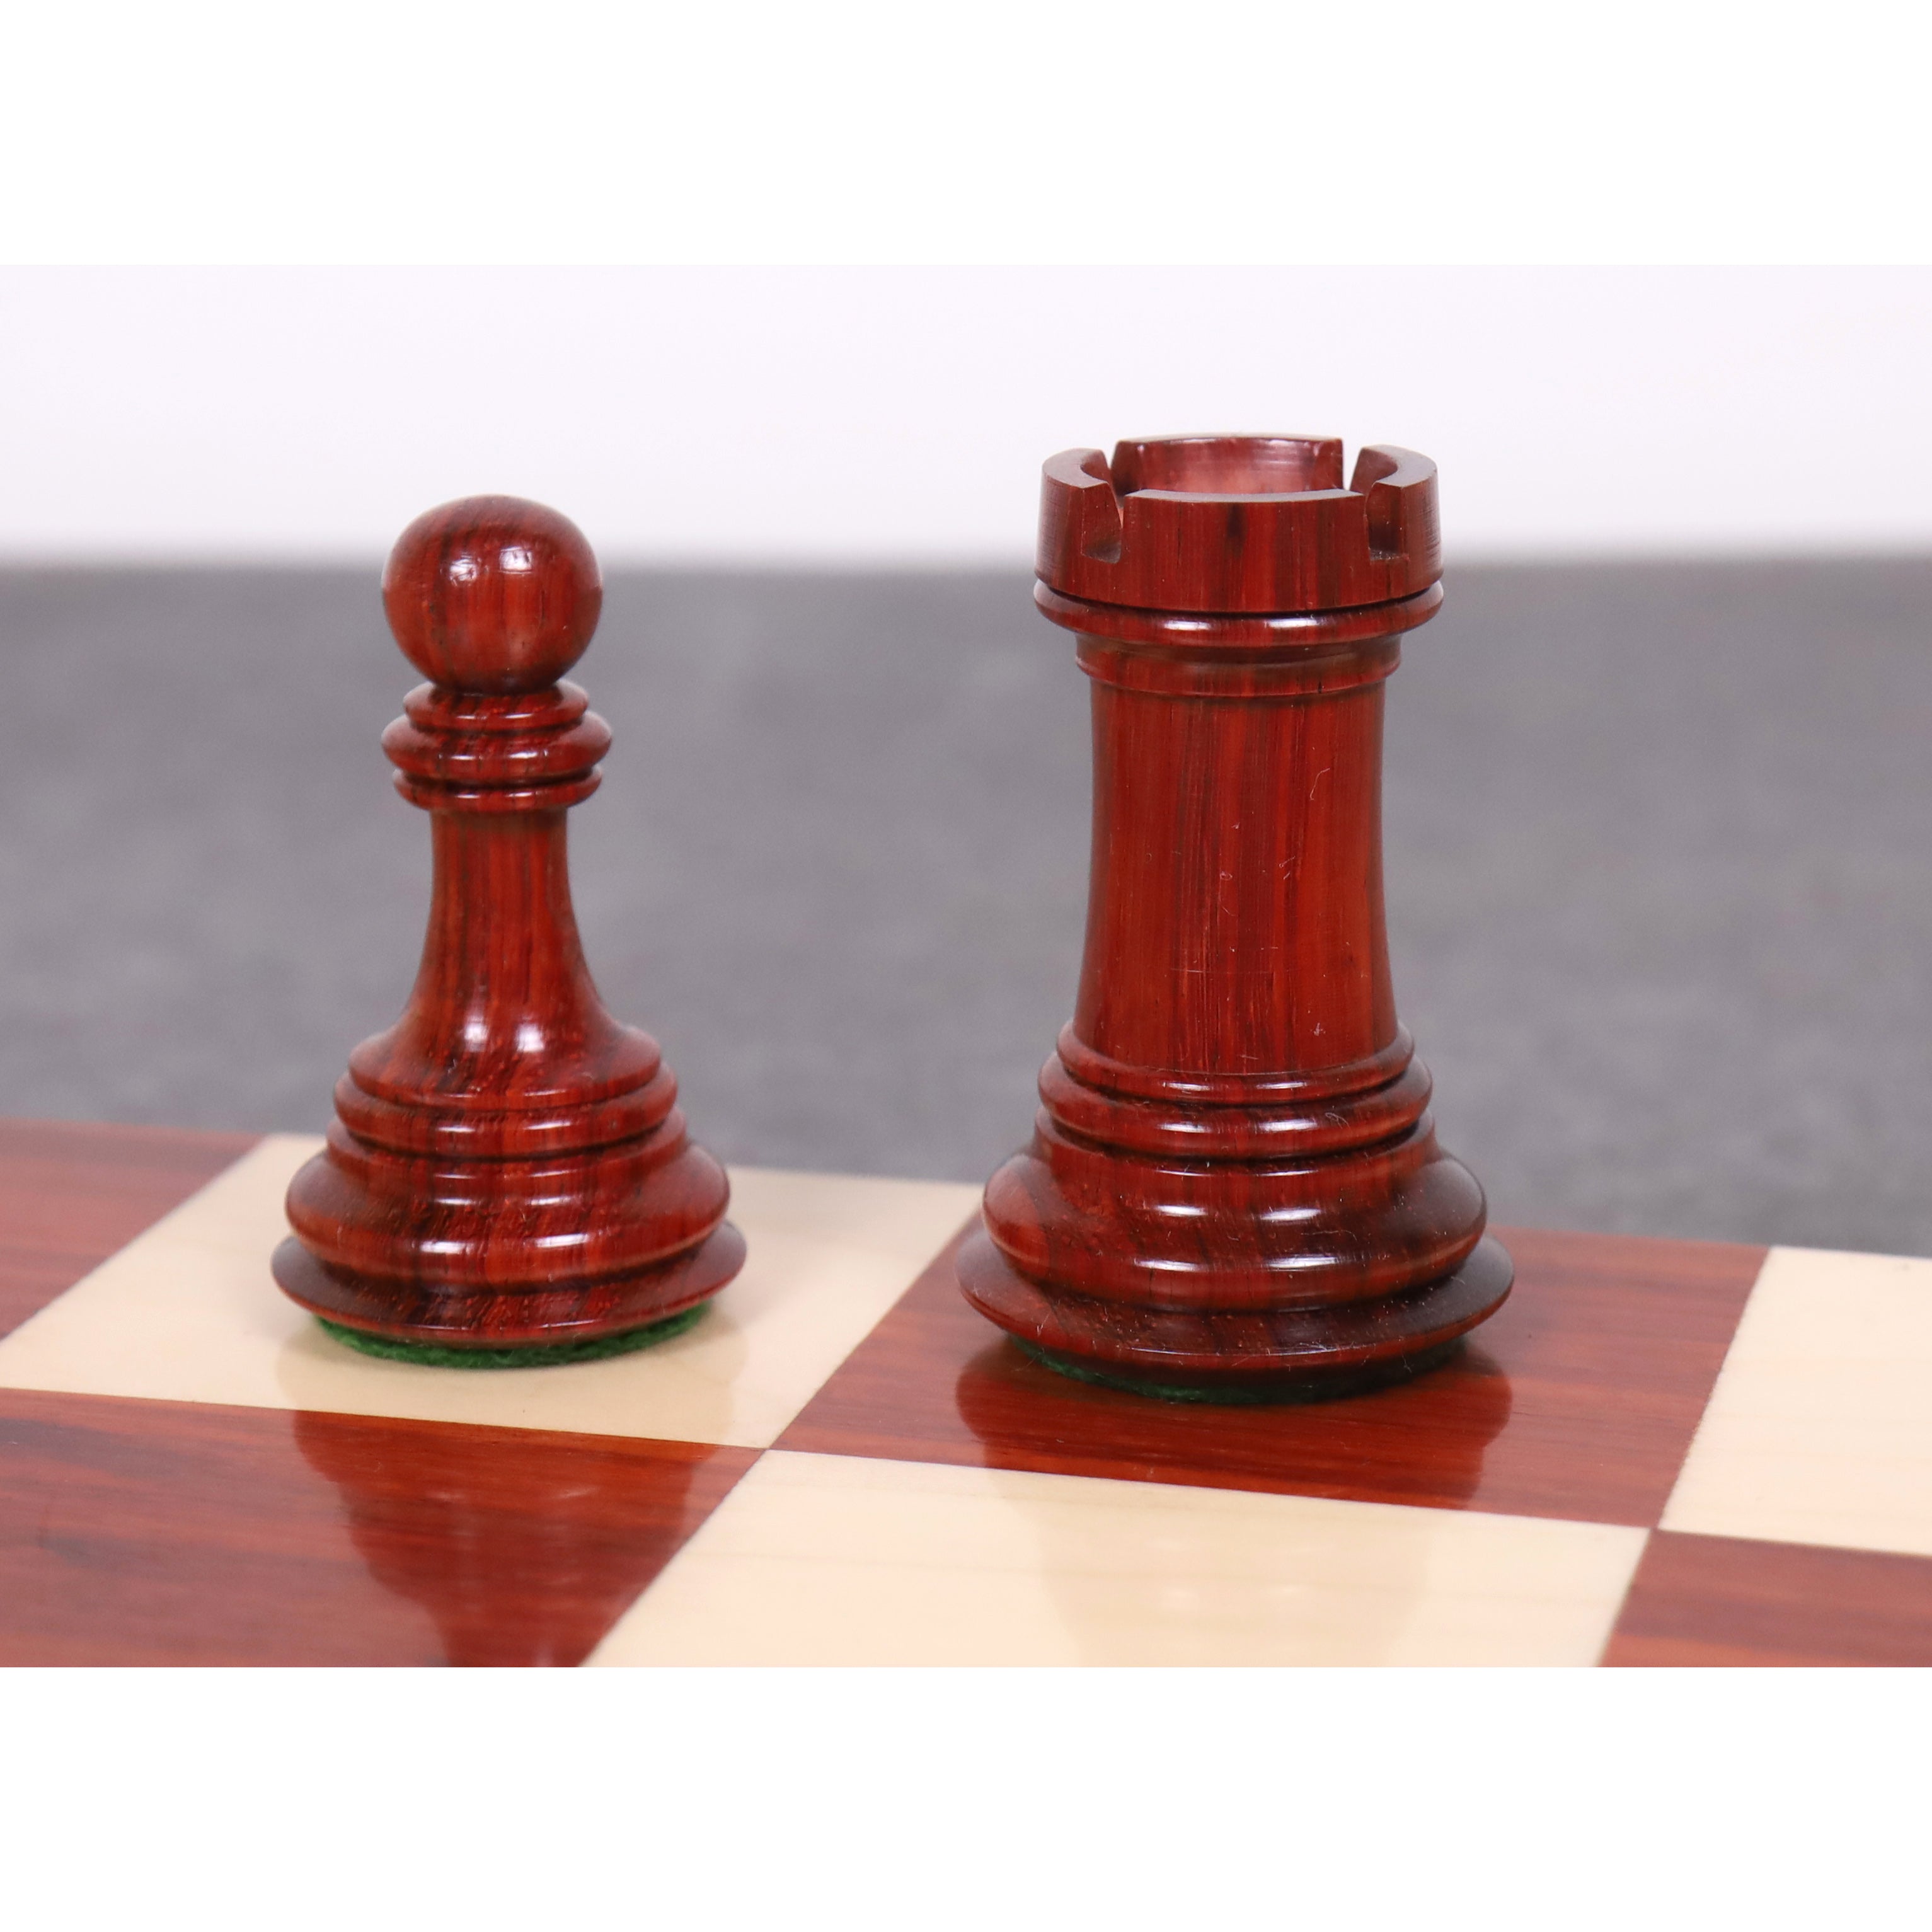 3.9" New Columbian Staunton Chess Set- Chess Pieces Only - Bud Rosewood - Double Weighted